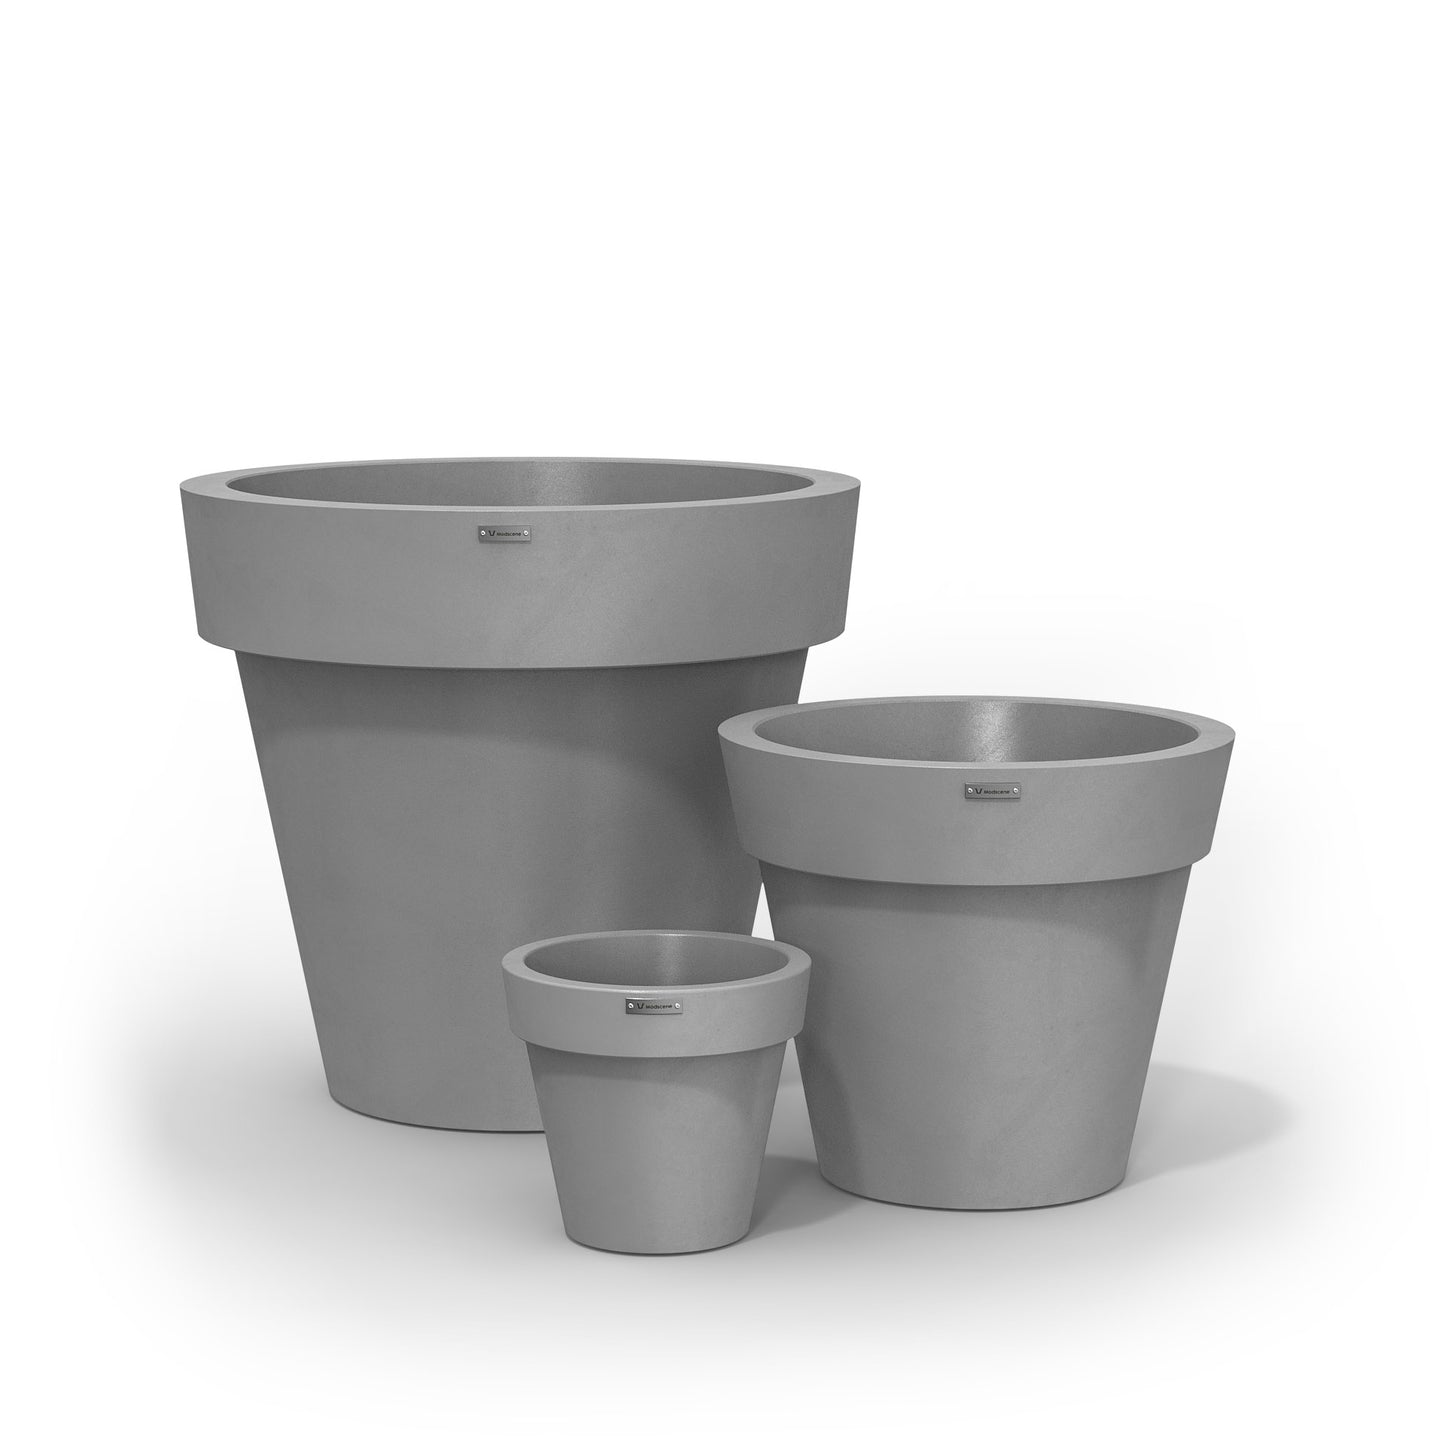 A cluster of three Modscene planters pots in a light grey colour with a concrete look.